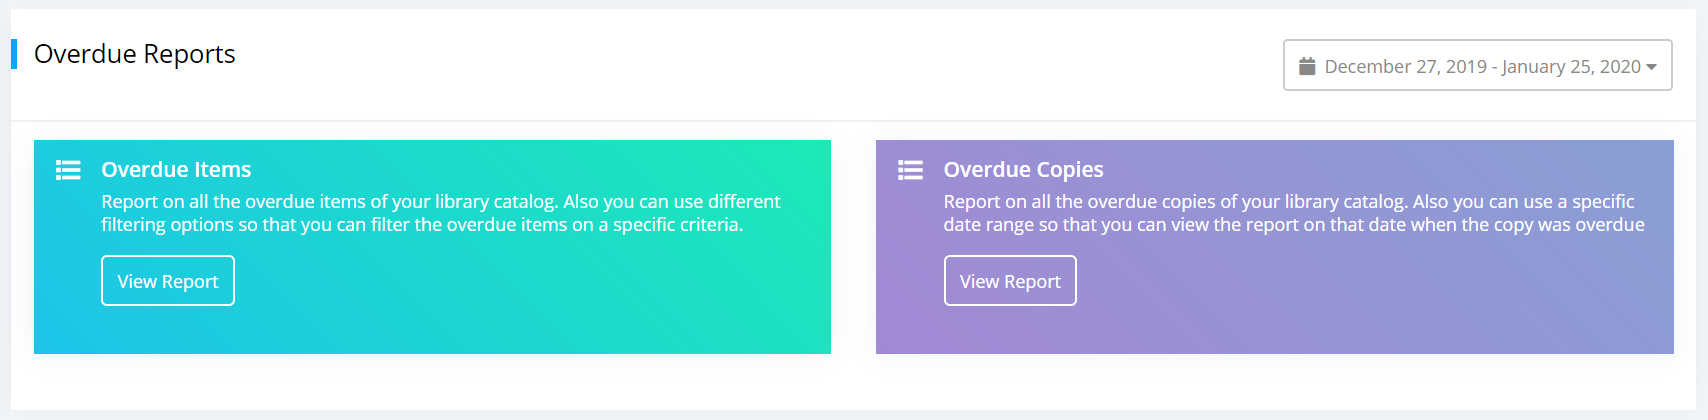 Overdue Reports main page